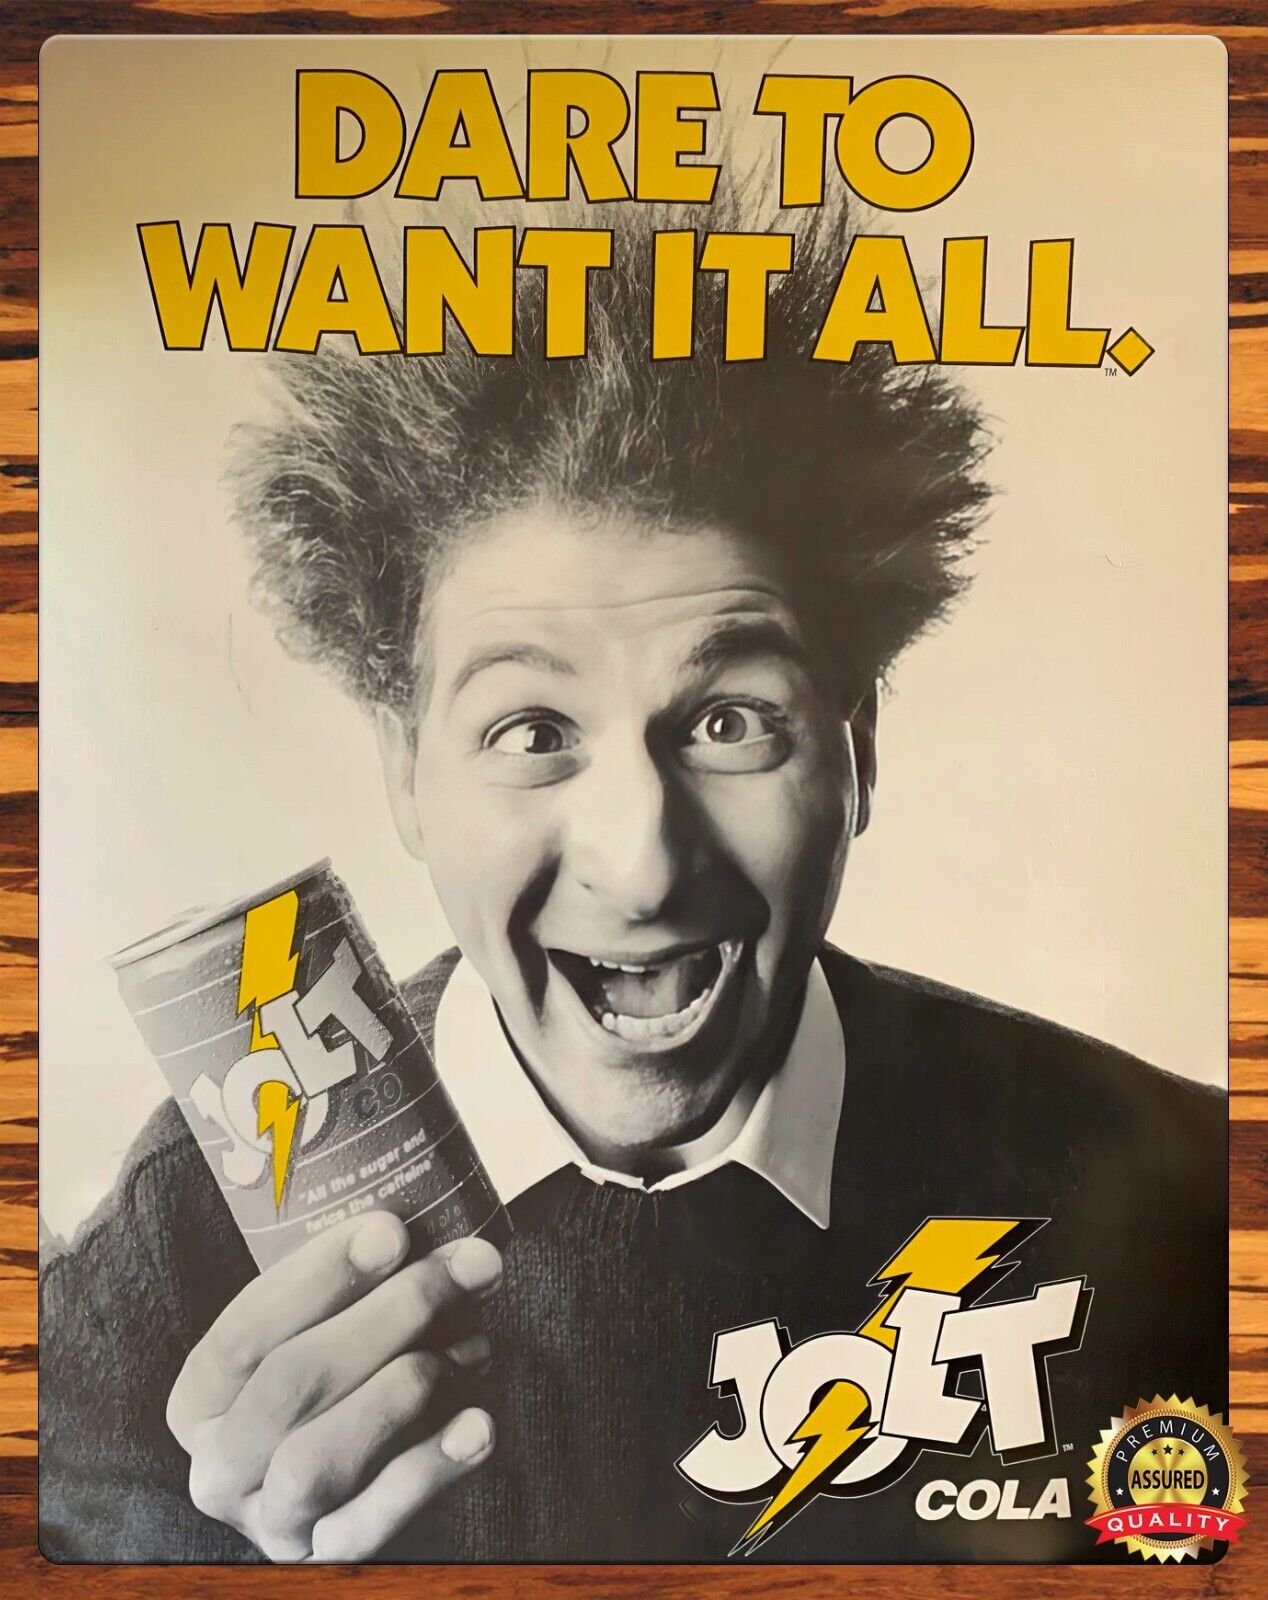 Jolt Cola - 1985 - Dare To Want It All - Metal Sign 11 x 14